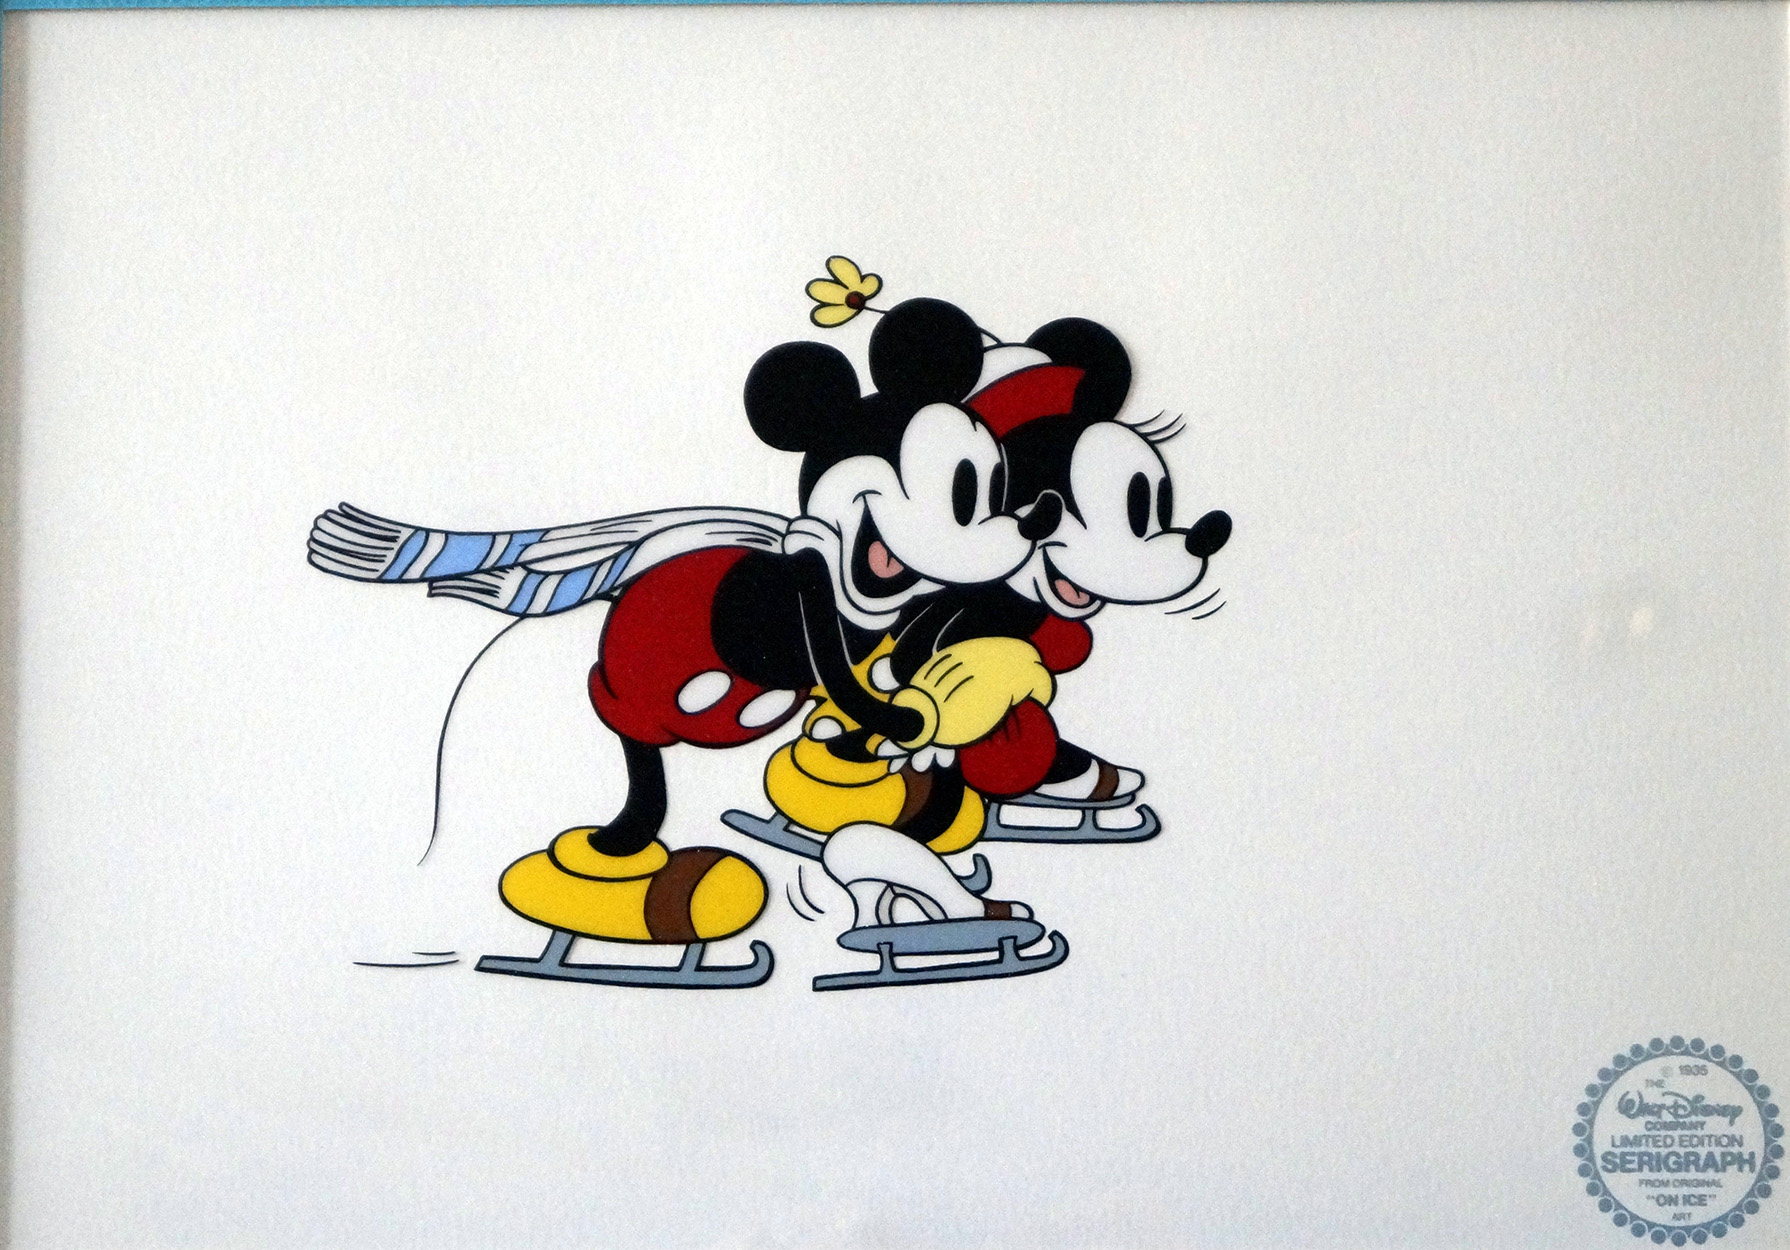 The Skating Lesson. Mickey and Minnie Mouse (Limited Edition Print) art by Disney Studio at The Illustration Art Gallery